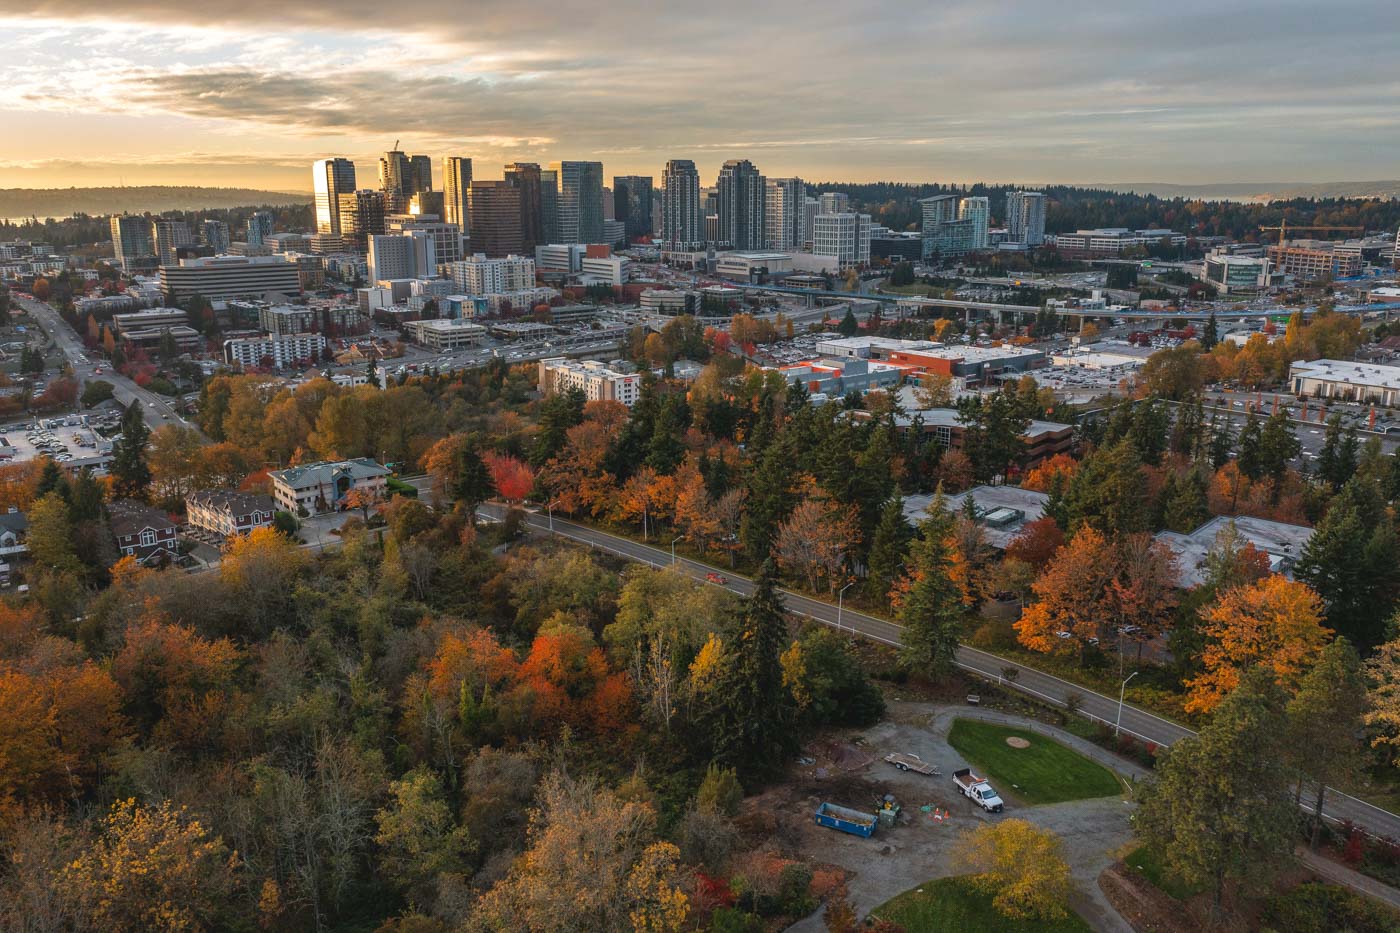 Sunset over downtown Bellevue with beautiful fall-colored trees in the foreground.